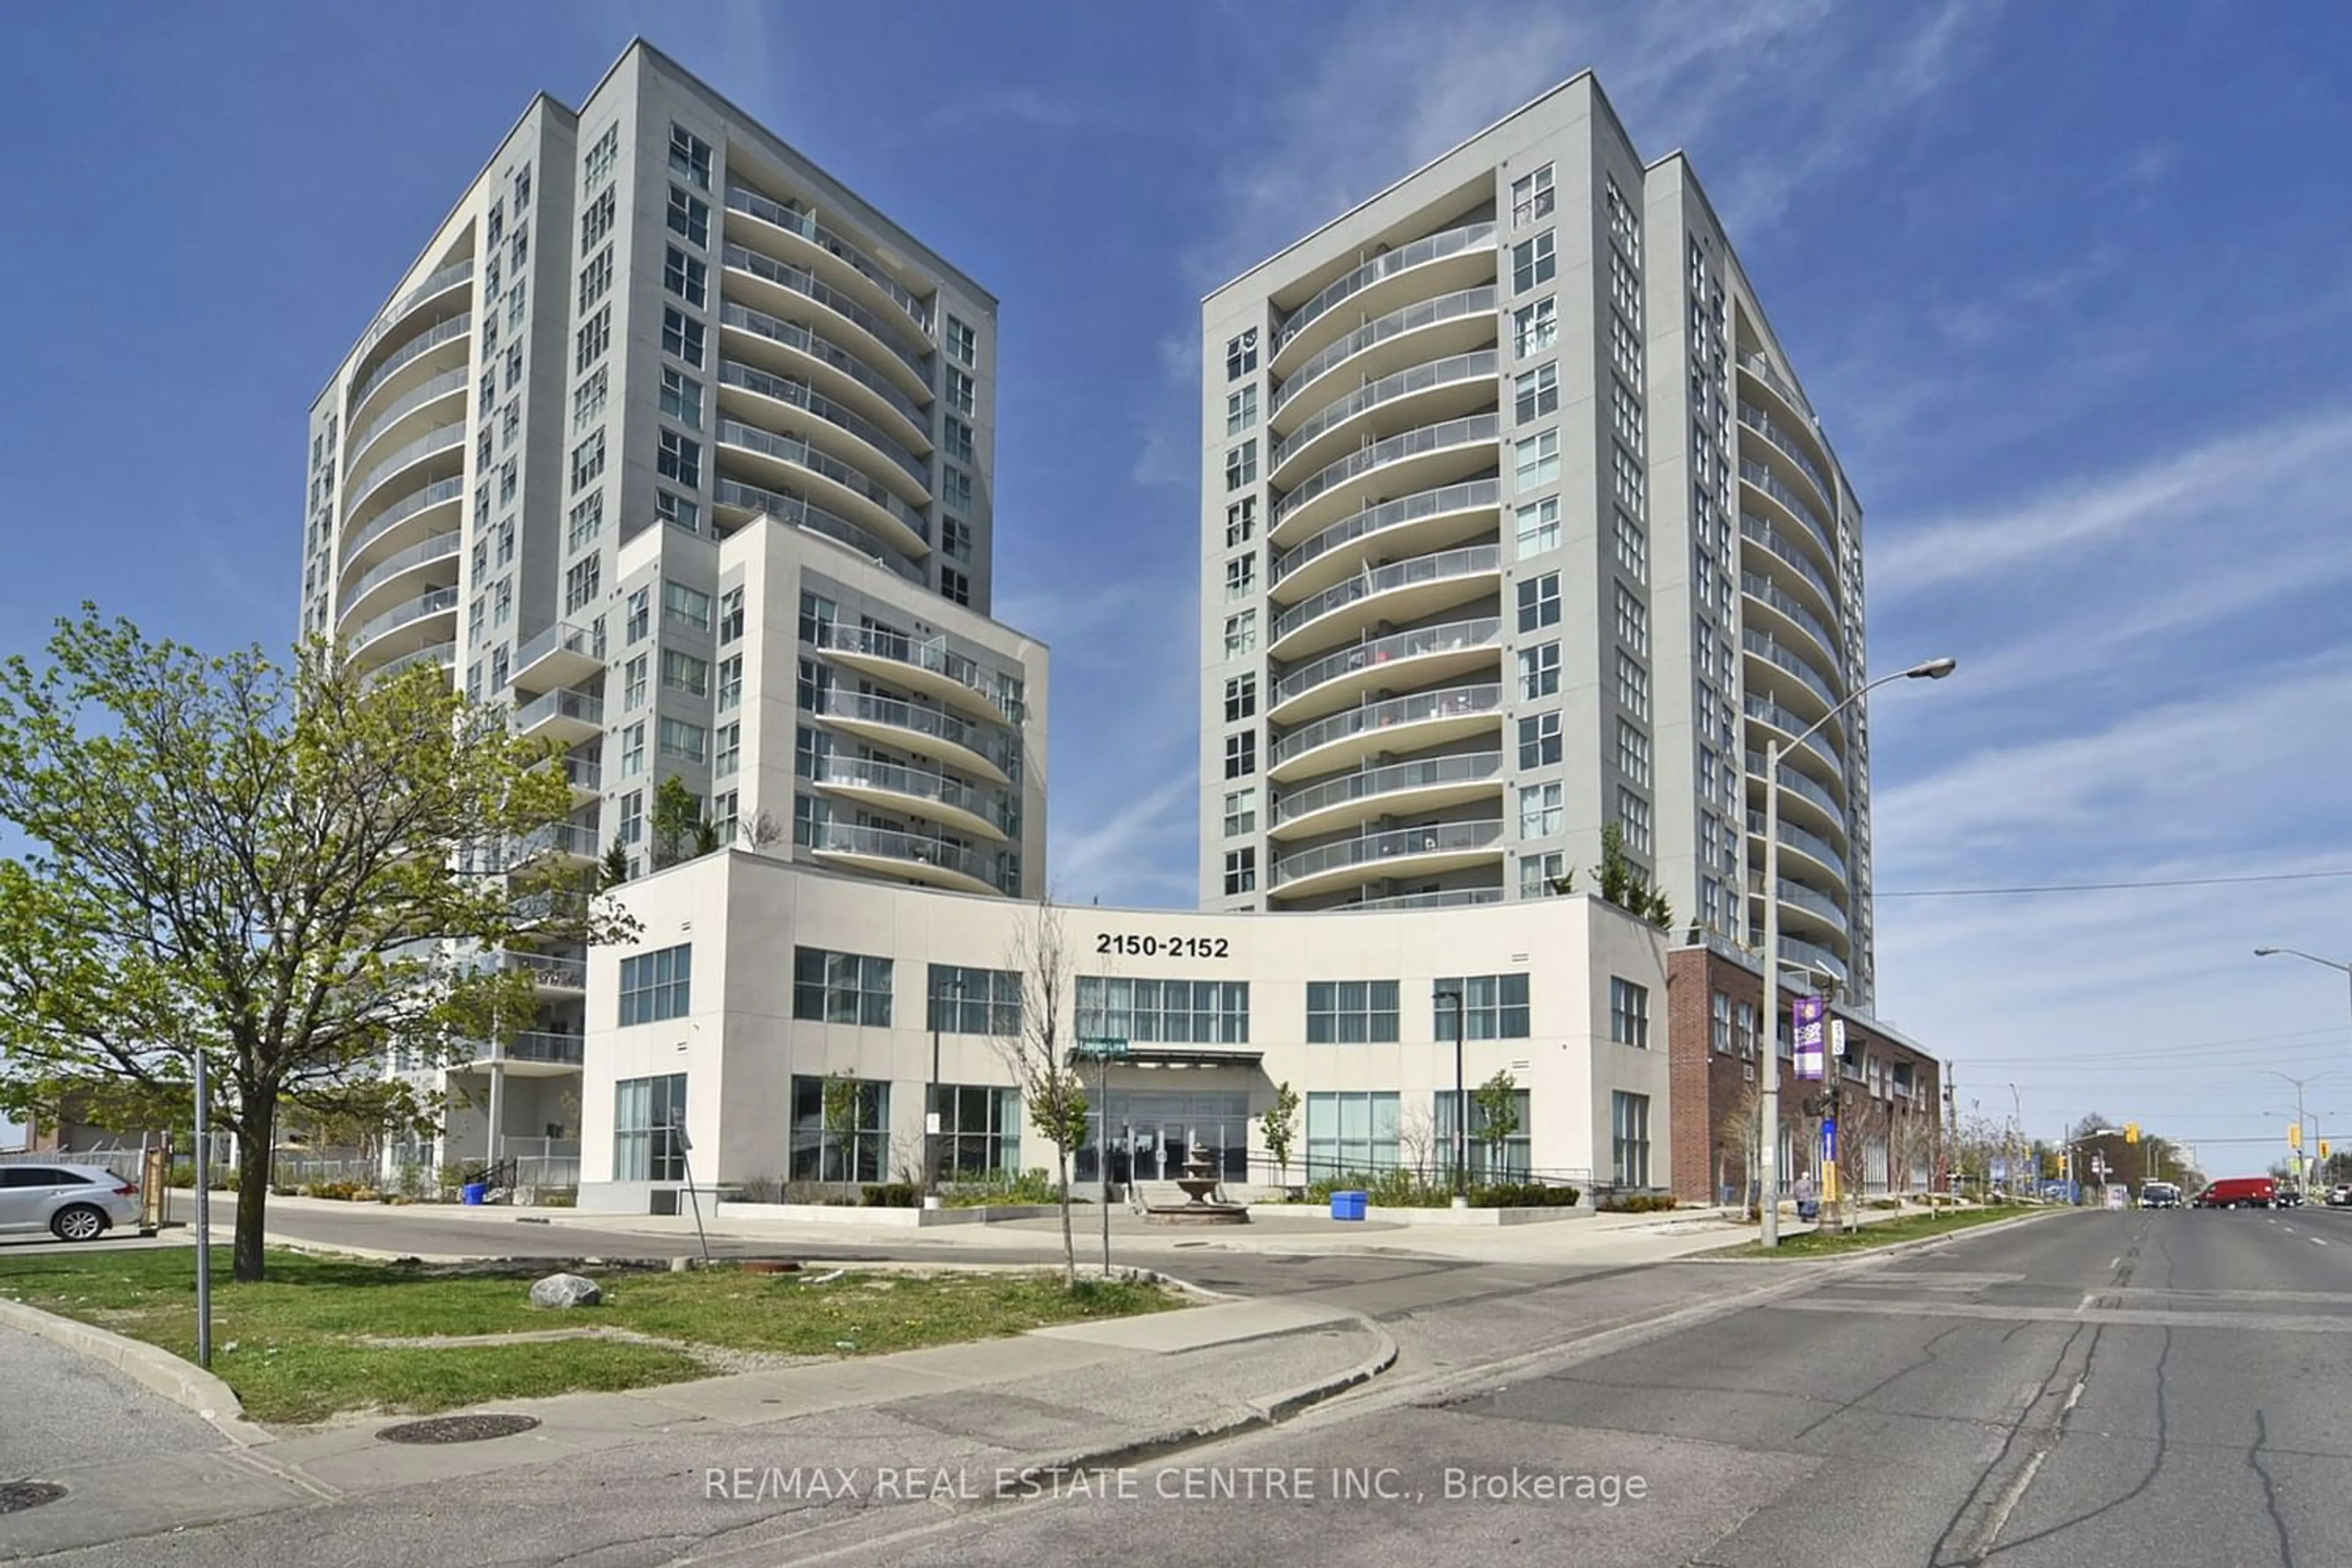 A pic from exterior of the house or condo for 2152 Lawrence Ave #808, Toronto Ontario M1R 0B7